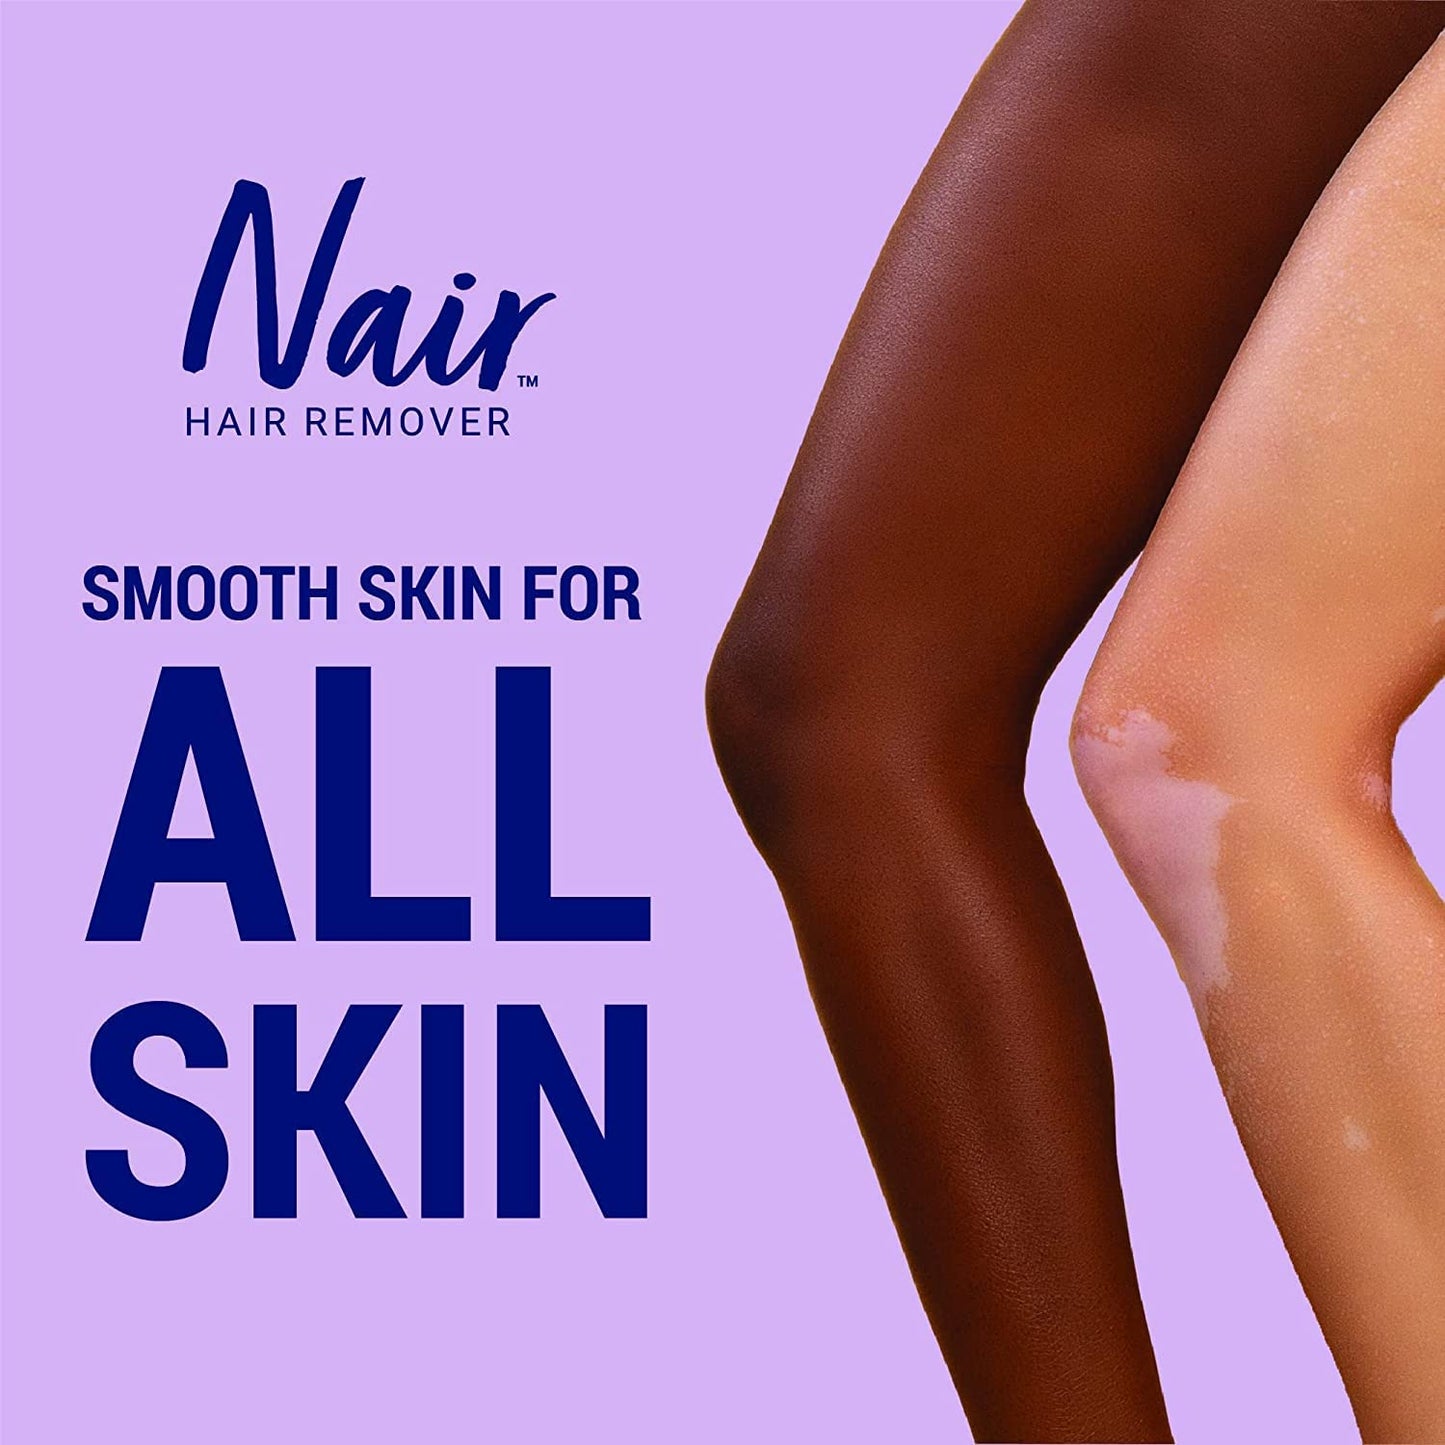 Nair Body Cream Hair Remover Softening Baby Oil Smooth Skin For Days - 255g